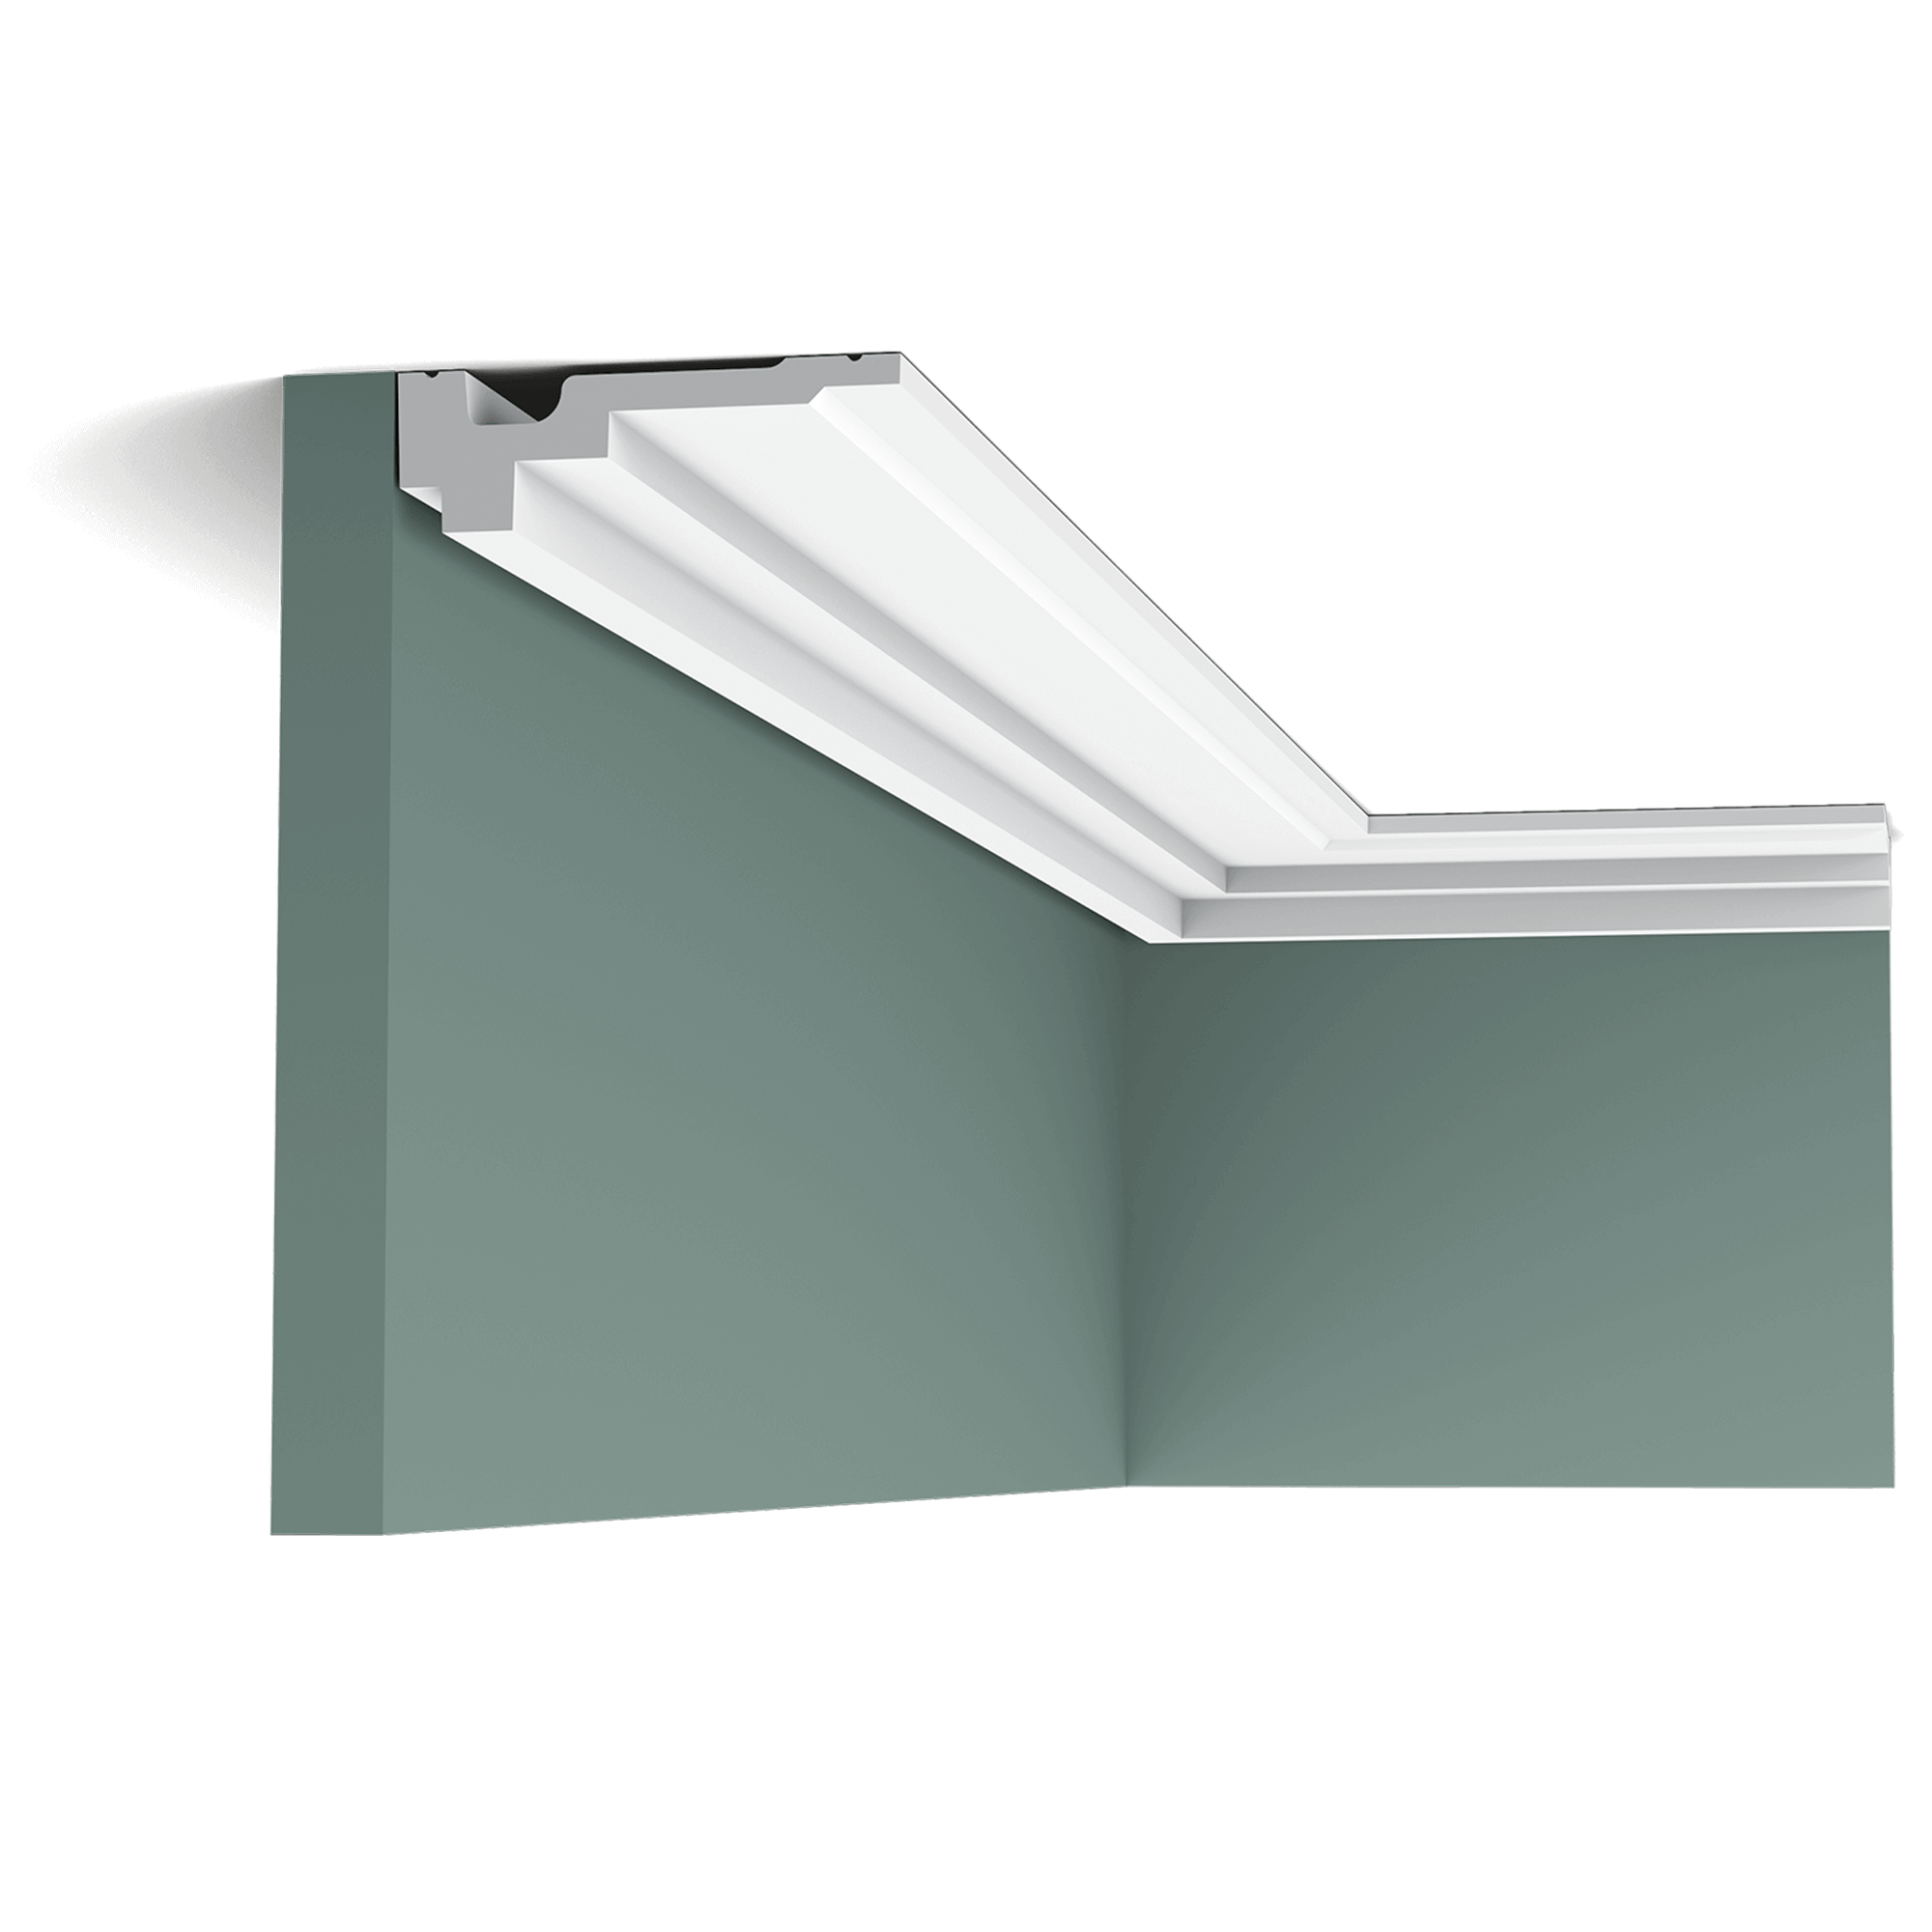 c355 cornice moulding 9fa1 This flat cornice moulding which extends along the ceiling provides a floating effect thanks to the recessed shadow line. Designed by Jacques Vergracht.